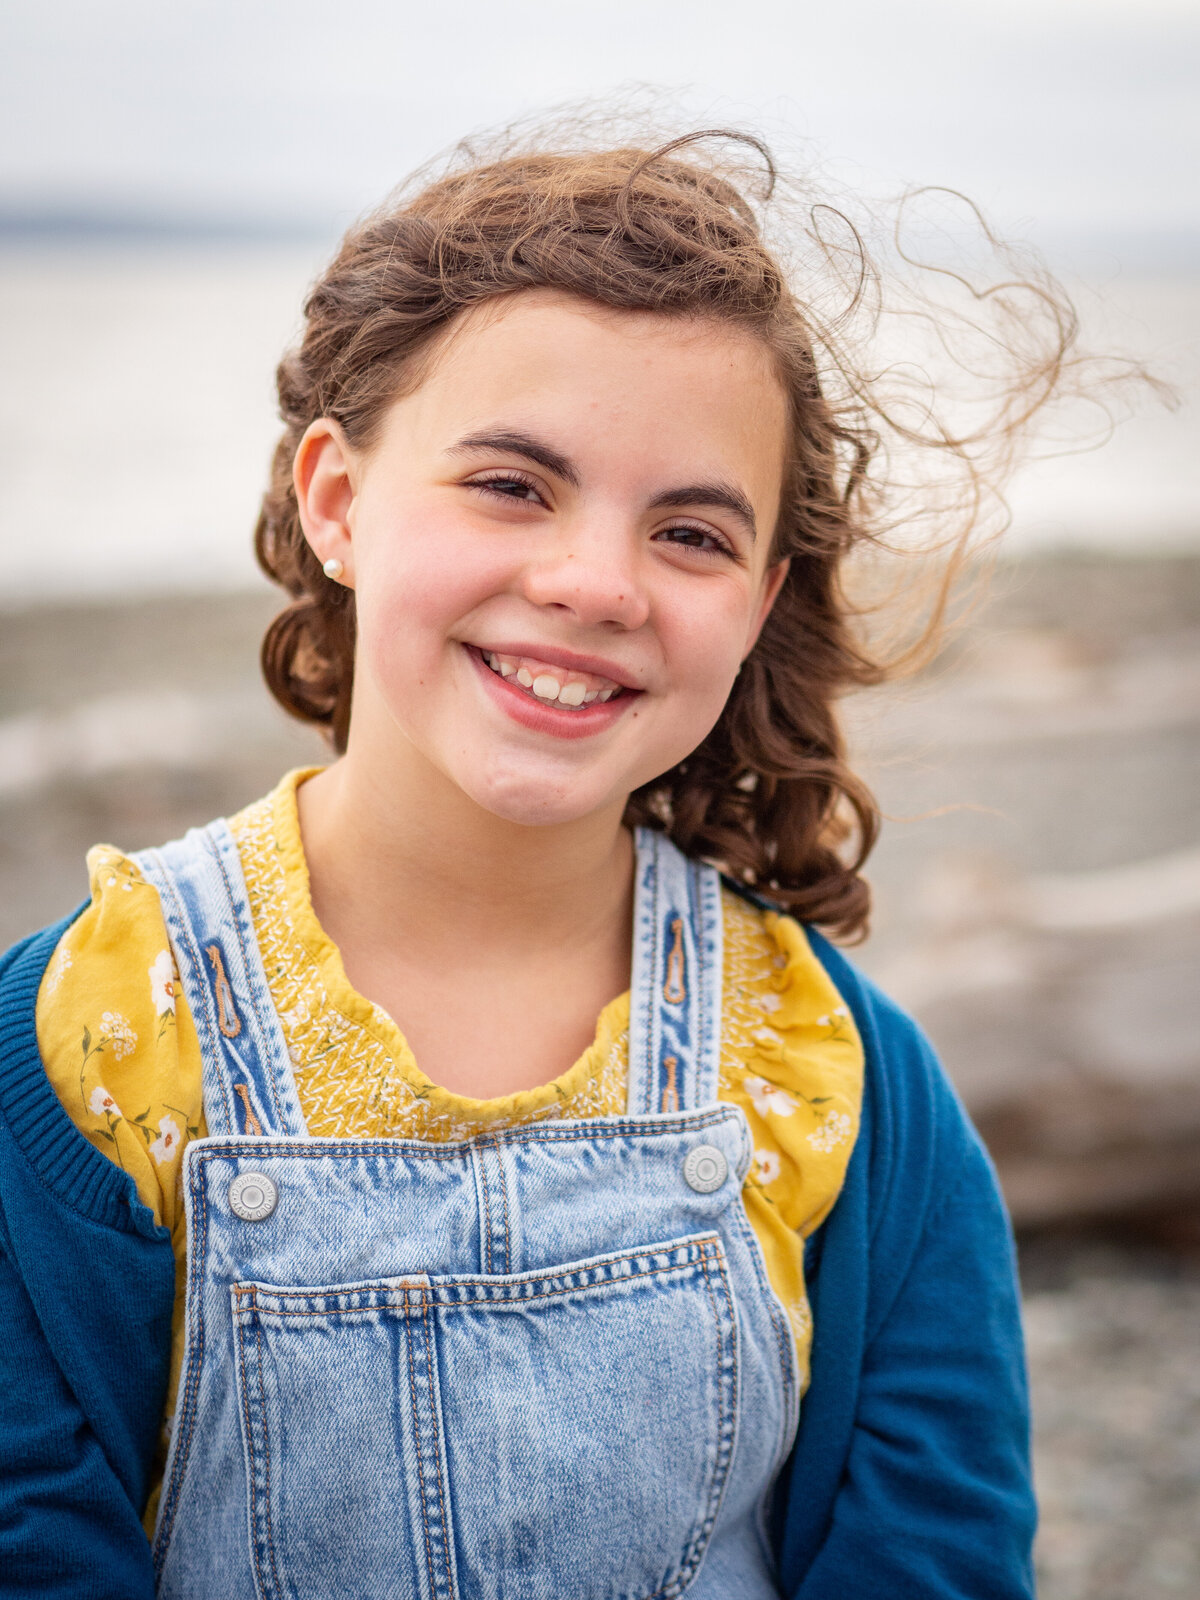 Portrait of a child at the beach with the wind blowing her hair.